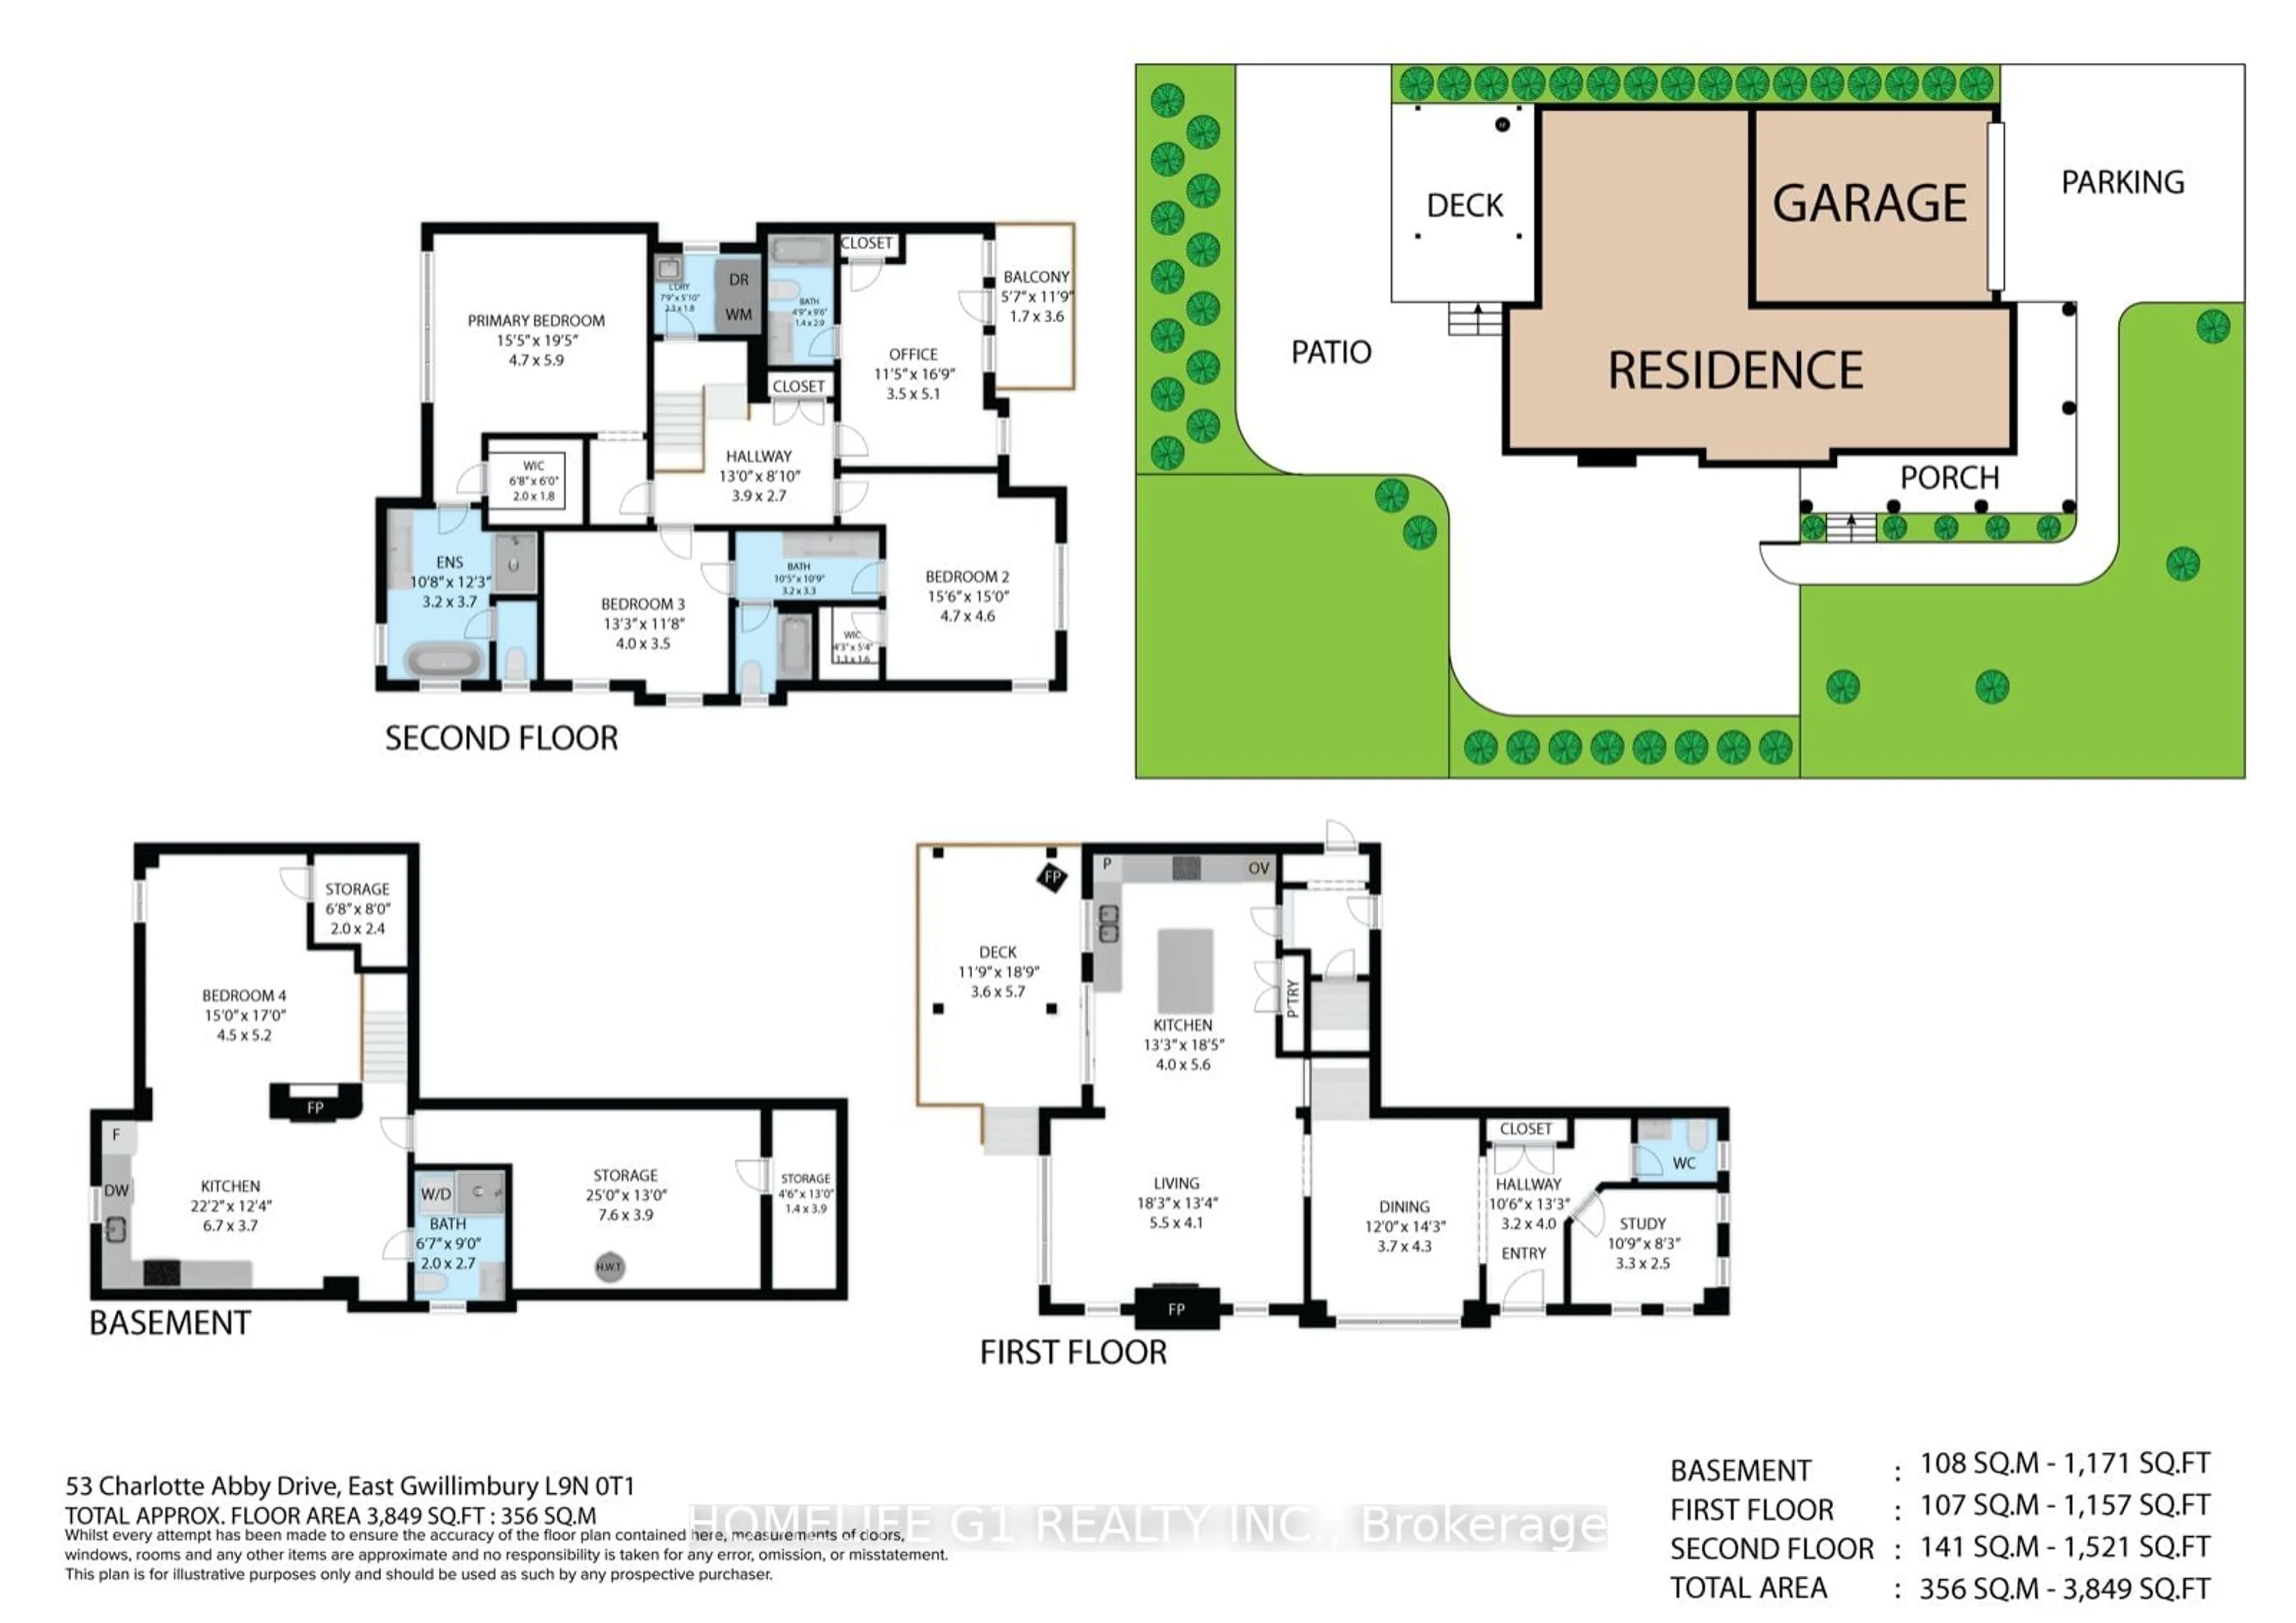 Floor plan for 53 Charlotte Abby Dr, East Gwillimbury Ontario L9N 0T1